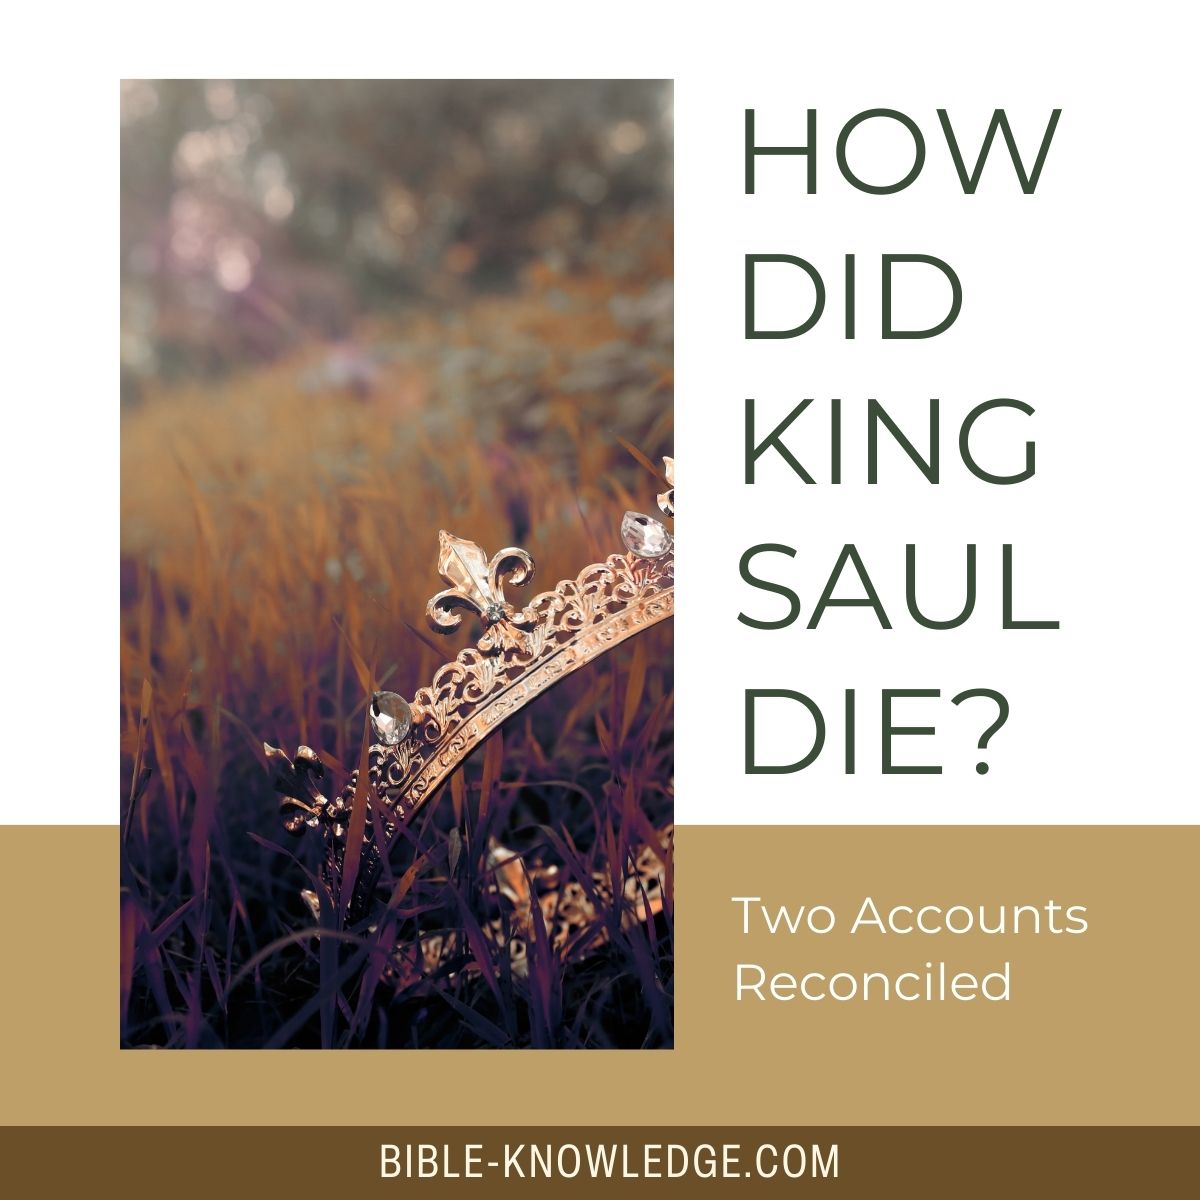 How Did King Saul Die? Two Accounts Reconciled